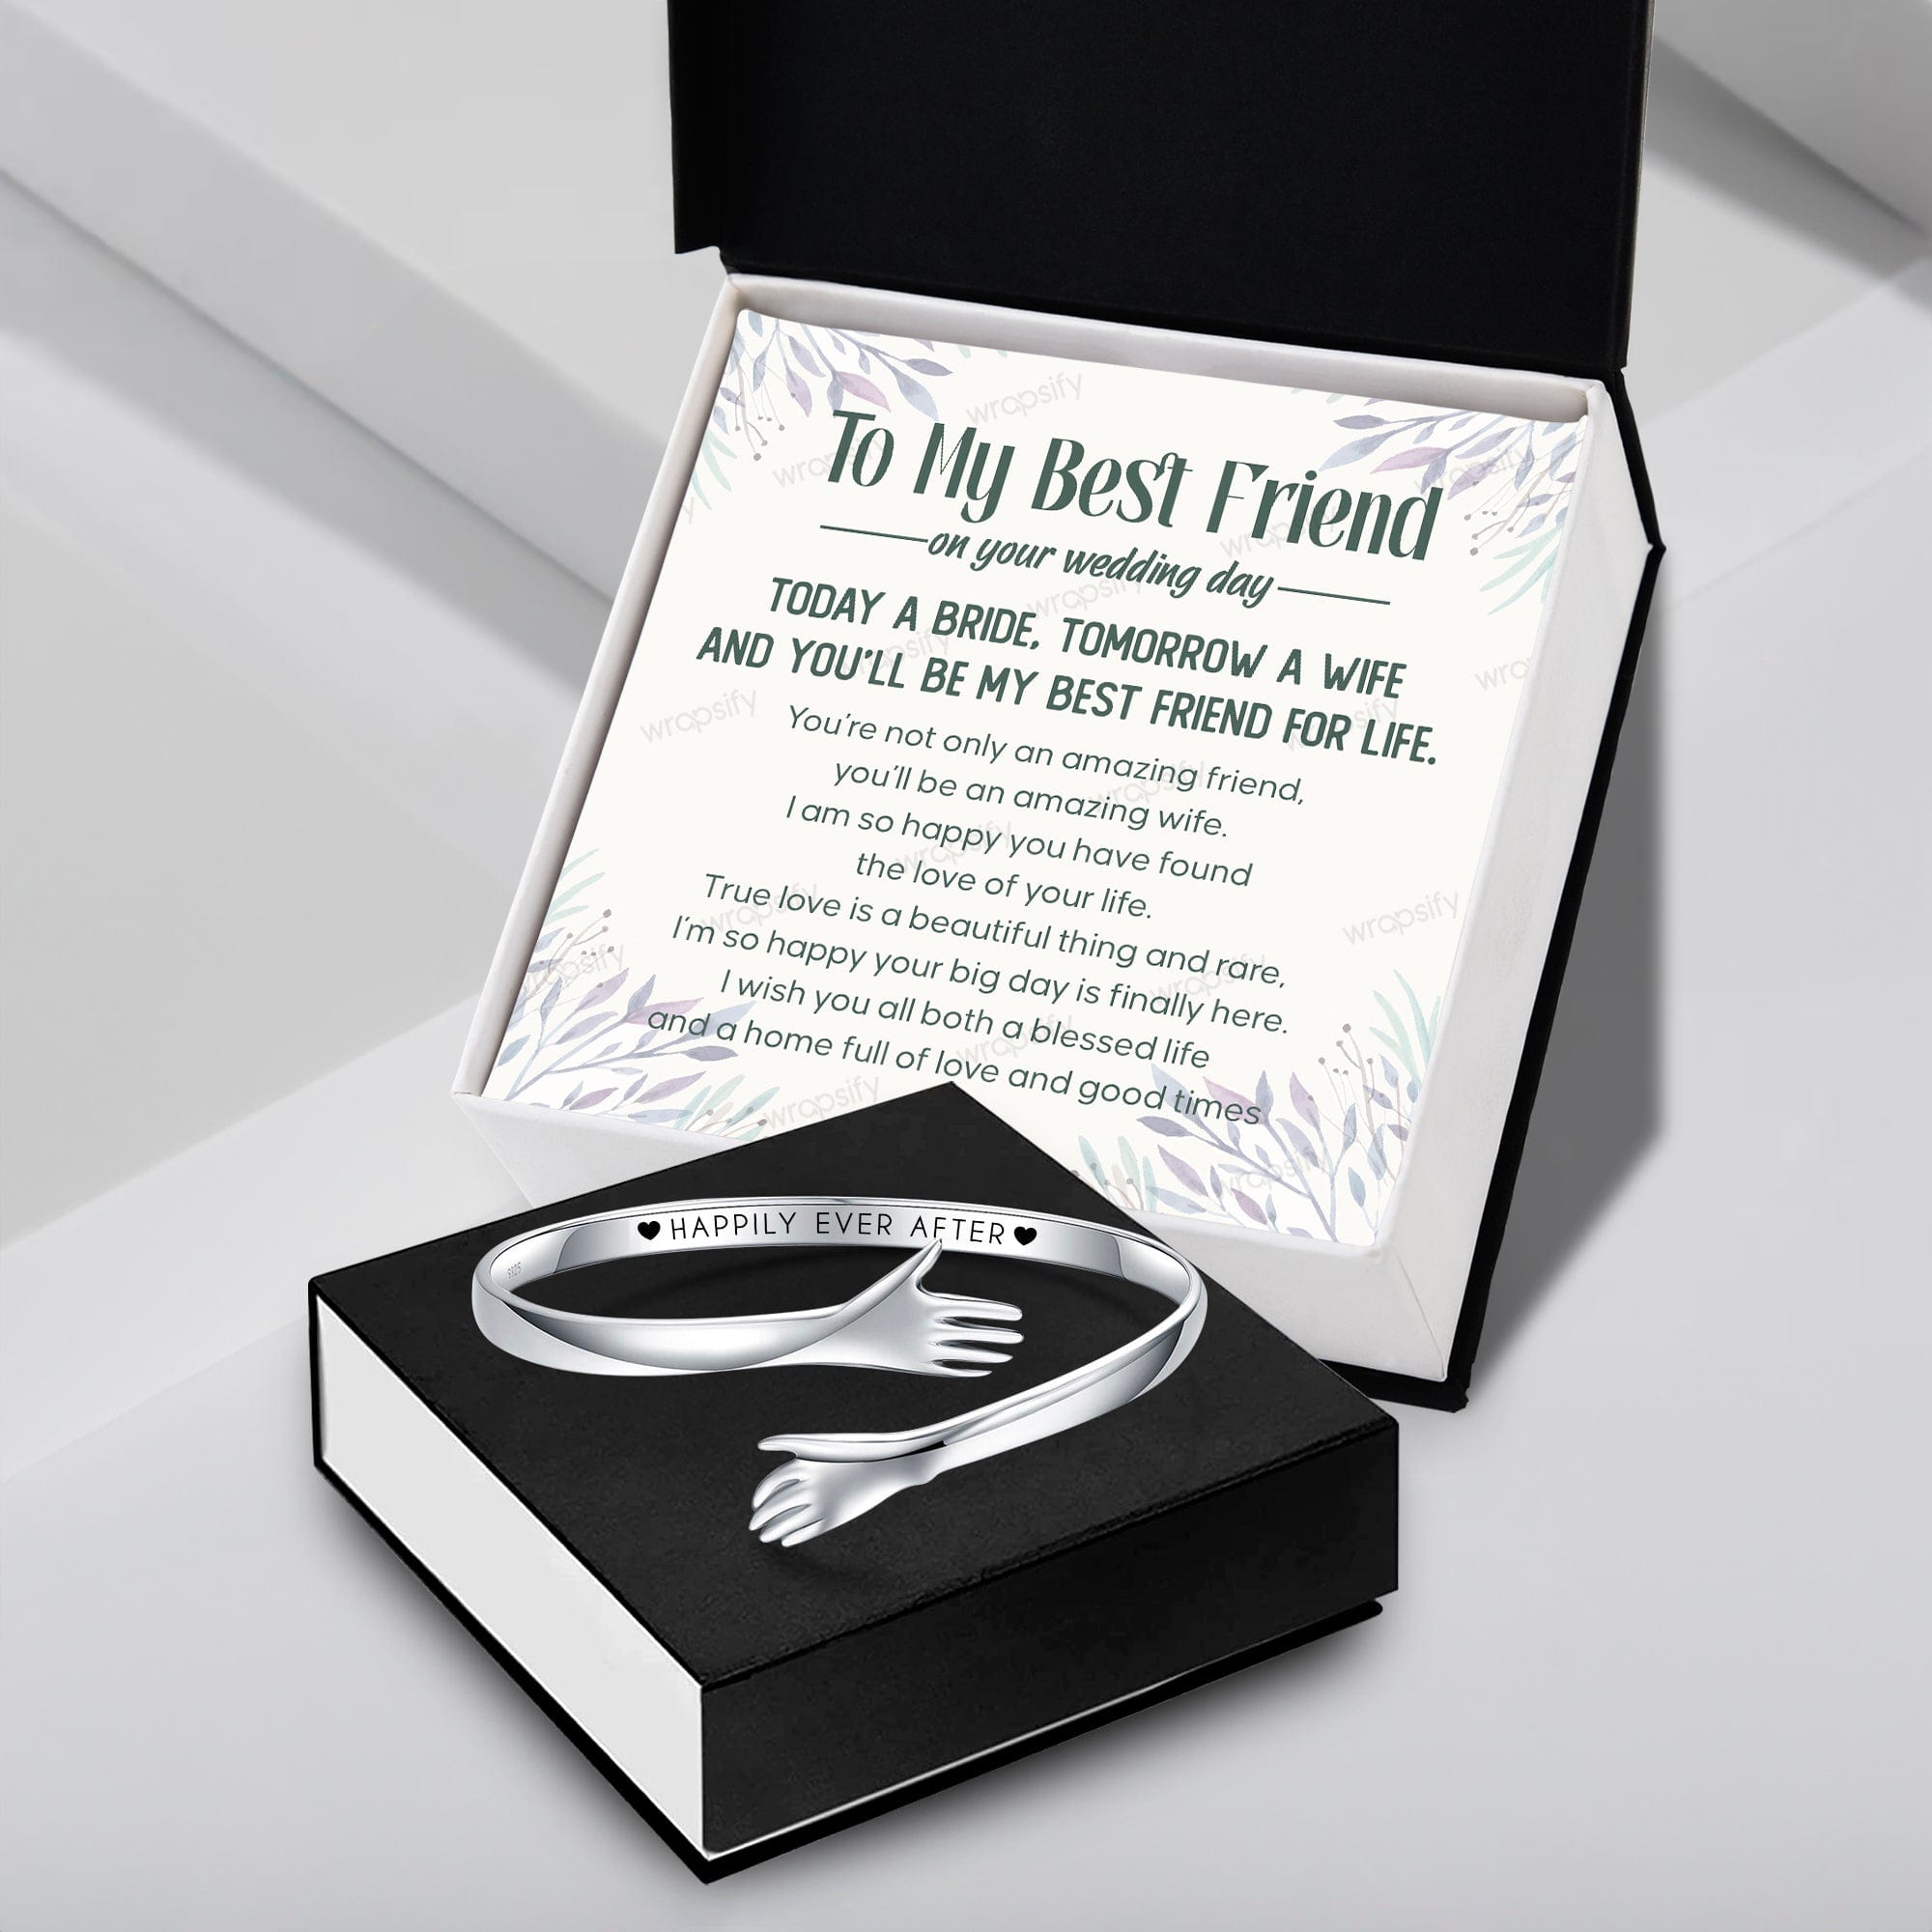 Hugging Bracelet - Wedding - To Bride - You’ll Be My Best Friend For Life - Gbbq39003